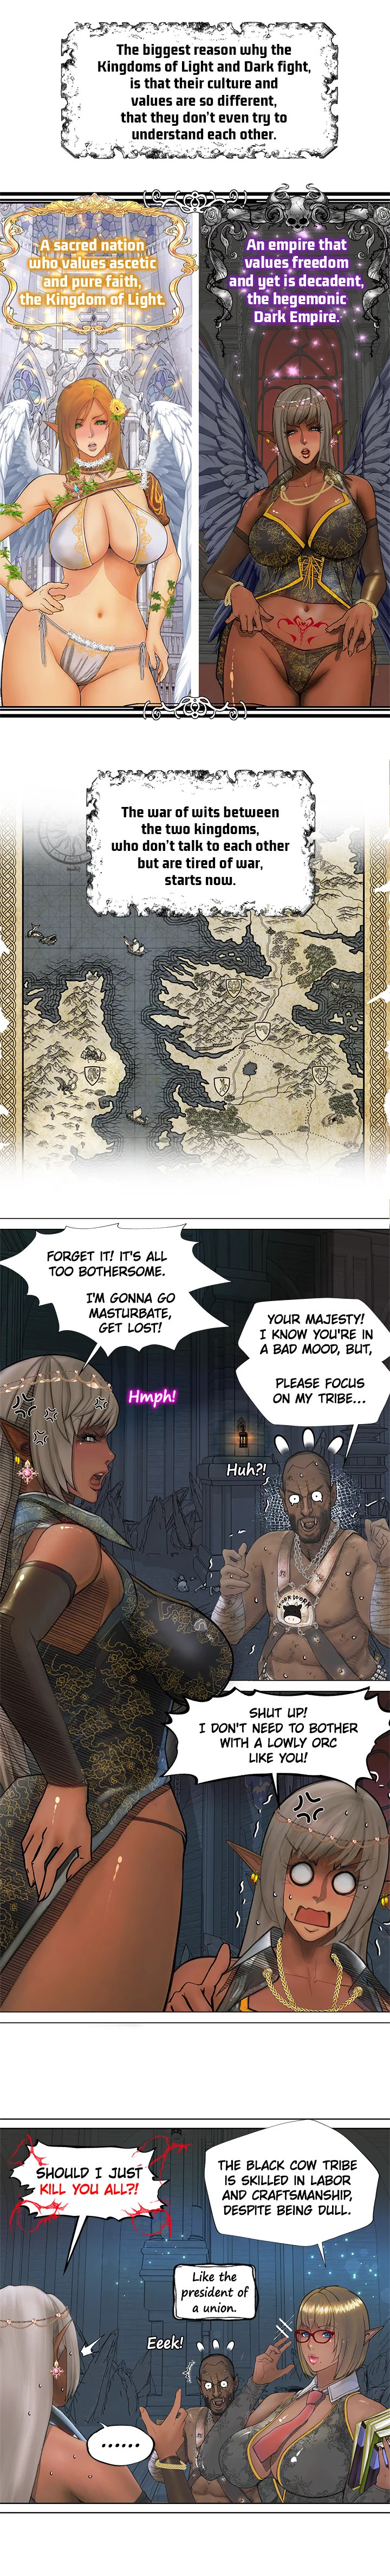 The DARK ELF QUEEN and the SLAVE ORC - Chapter 1 Page 11